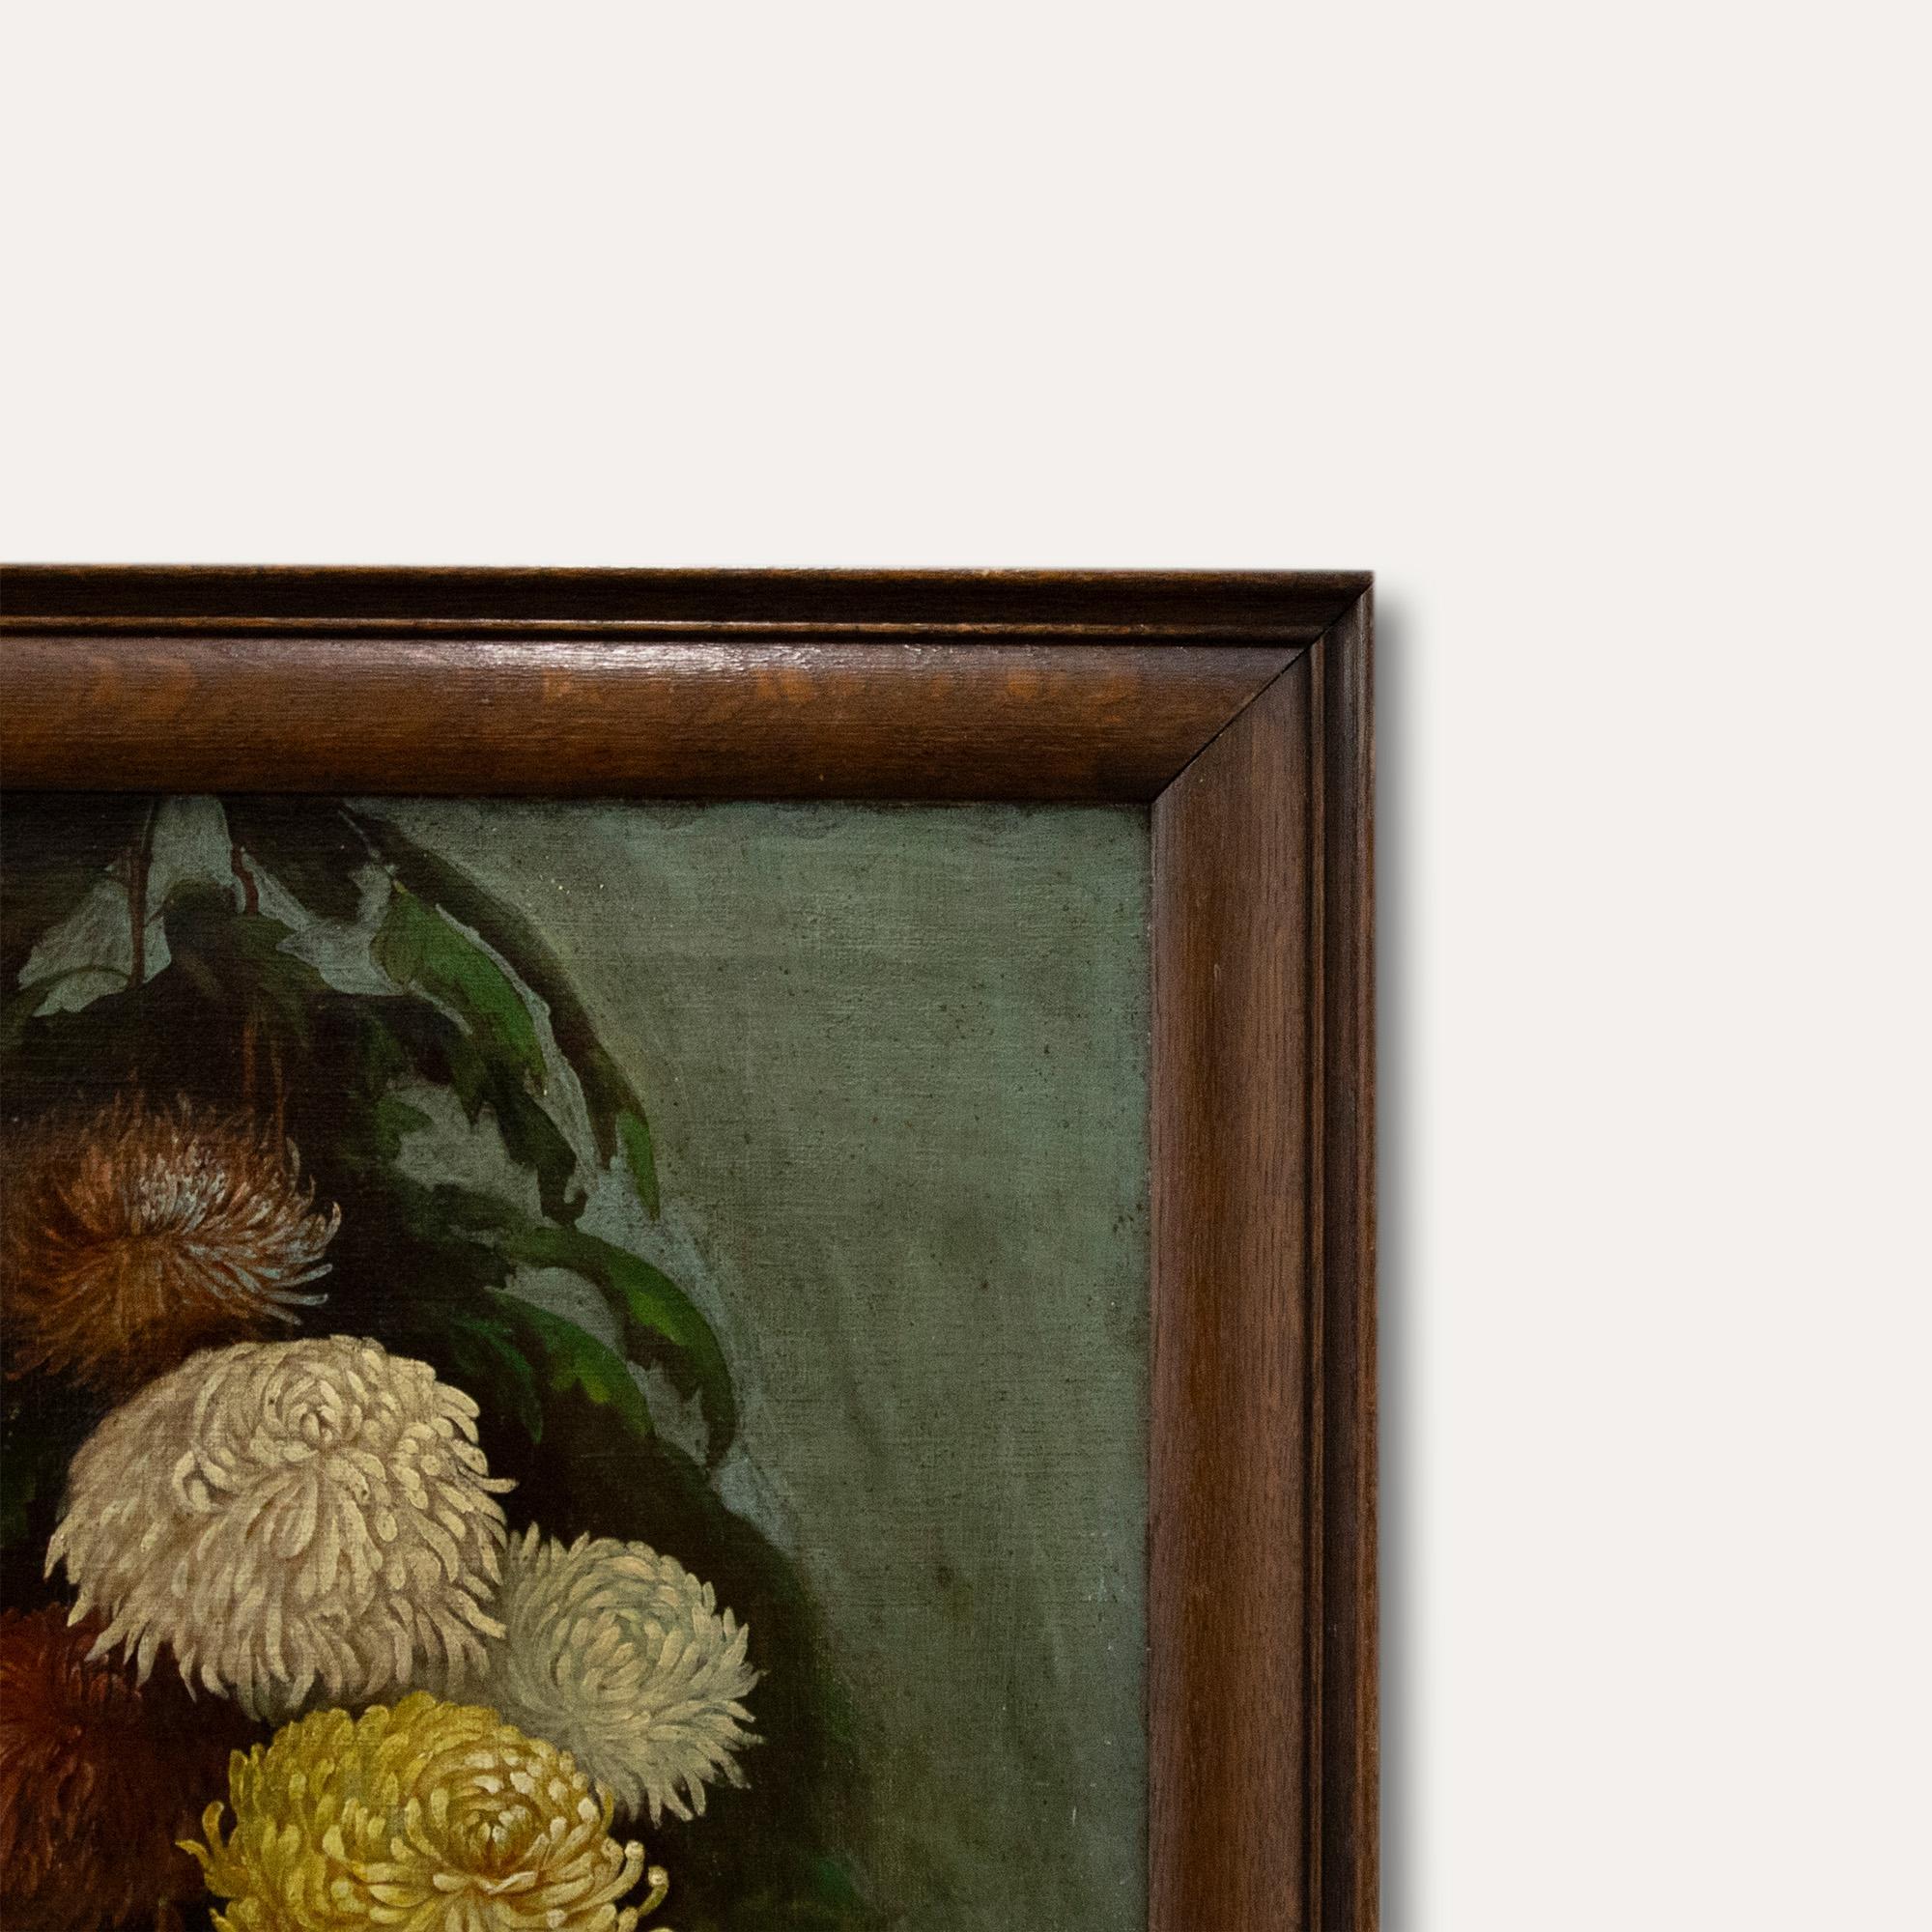 A delightful study of Chrysanthemums in yellow, red and orange growing in a garden. The bright blooms have a striking appearance against the darkened leaves and evening sky. Unsigned. Presented in an oak frame, On canvas.